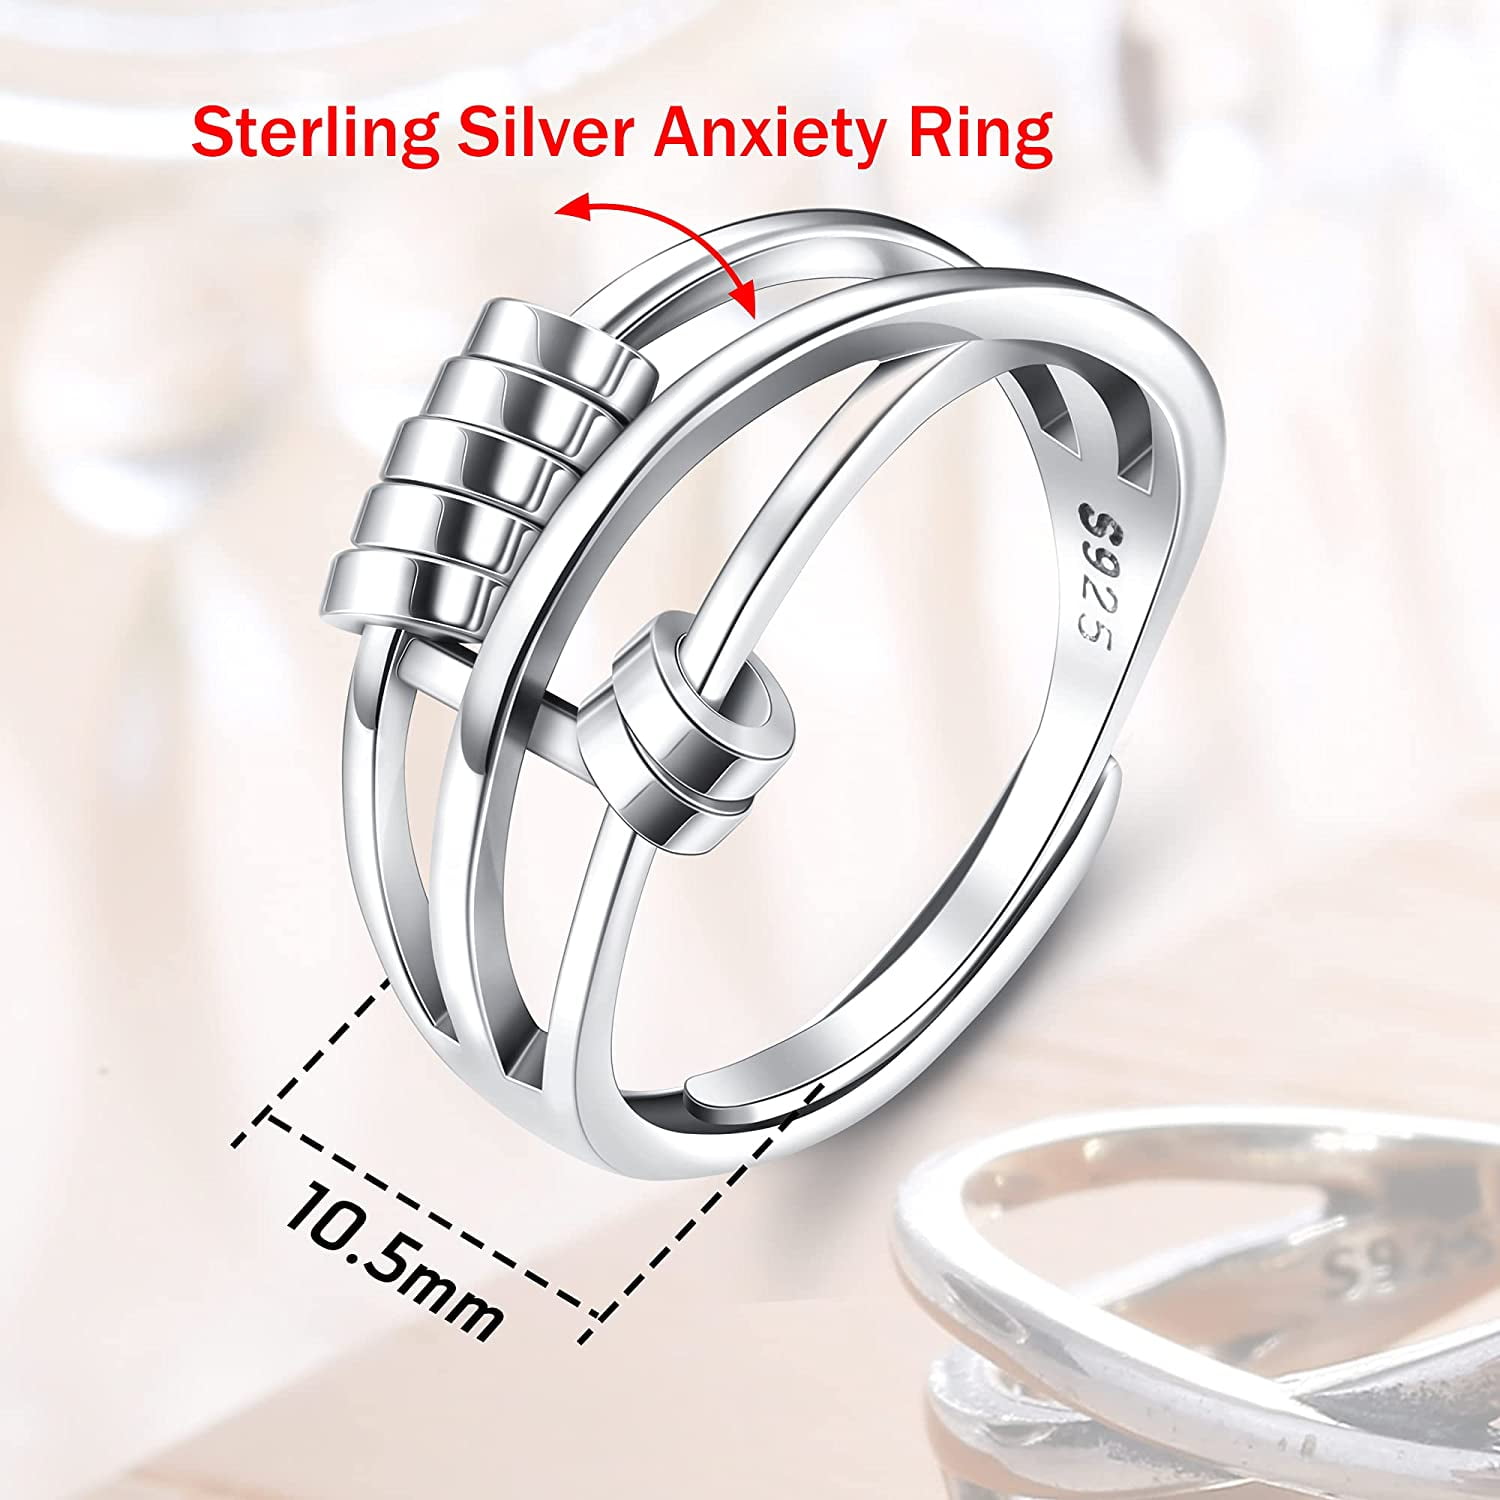 Milacolato 925 Sterling Silver Anxiety Ring for Women Men Fidget Peace Rings for Anxiety Stress Reliever Spinner Ring Retro Adjustable Band Rings Anxiety Relief Items